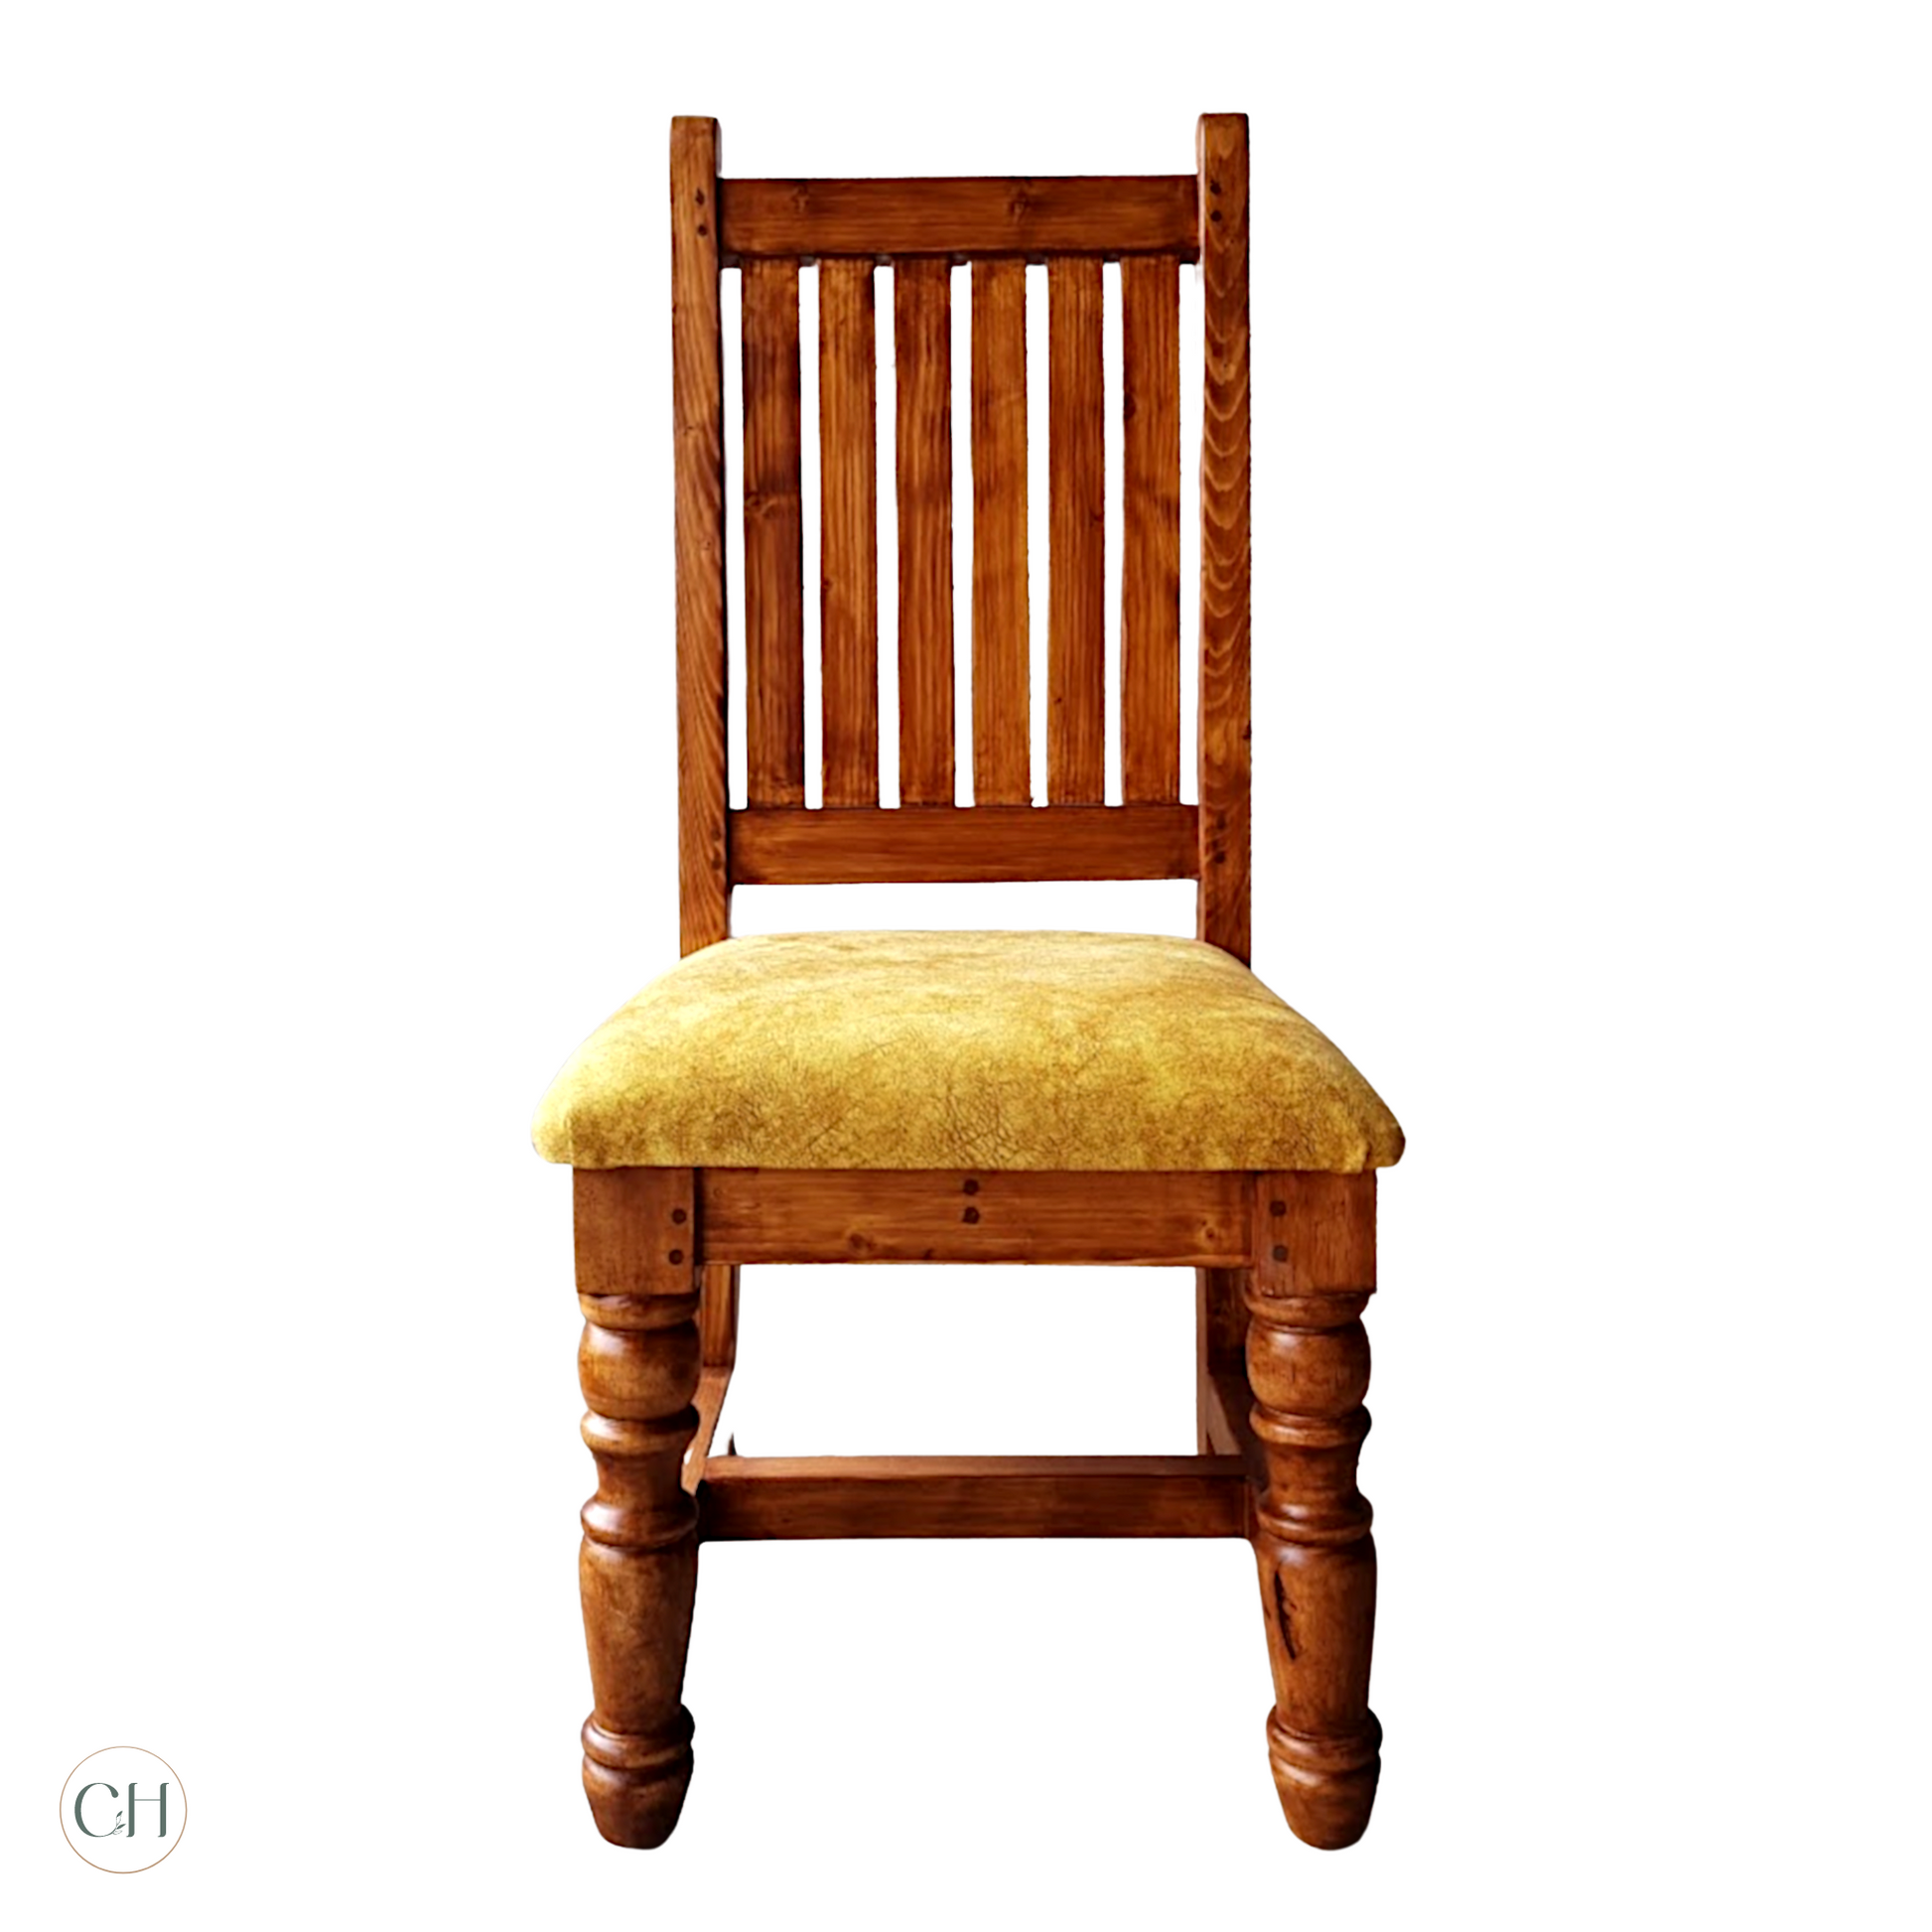 CustHum-Marigold-single chair bright yellow upholstery on seat, handturned legs (front view)